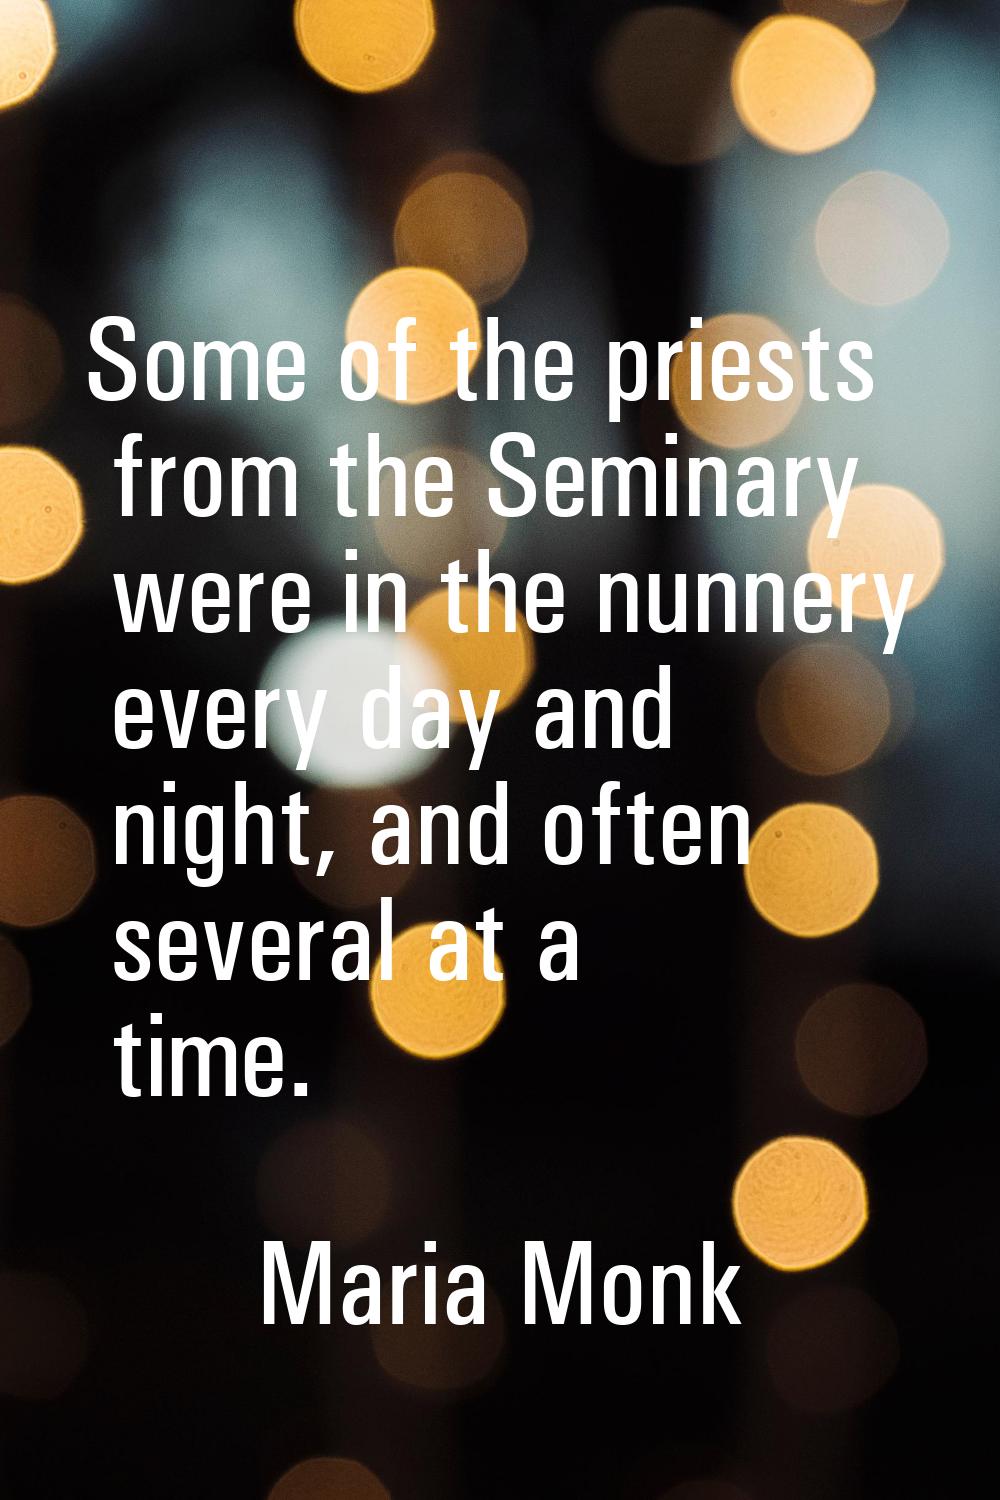 Some of the priests from the Seminary were in the nunnery every day and night, and often several at